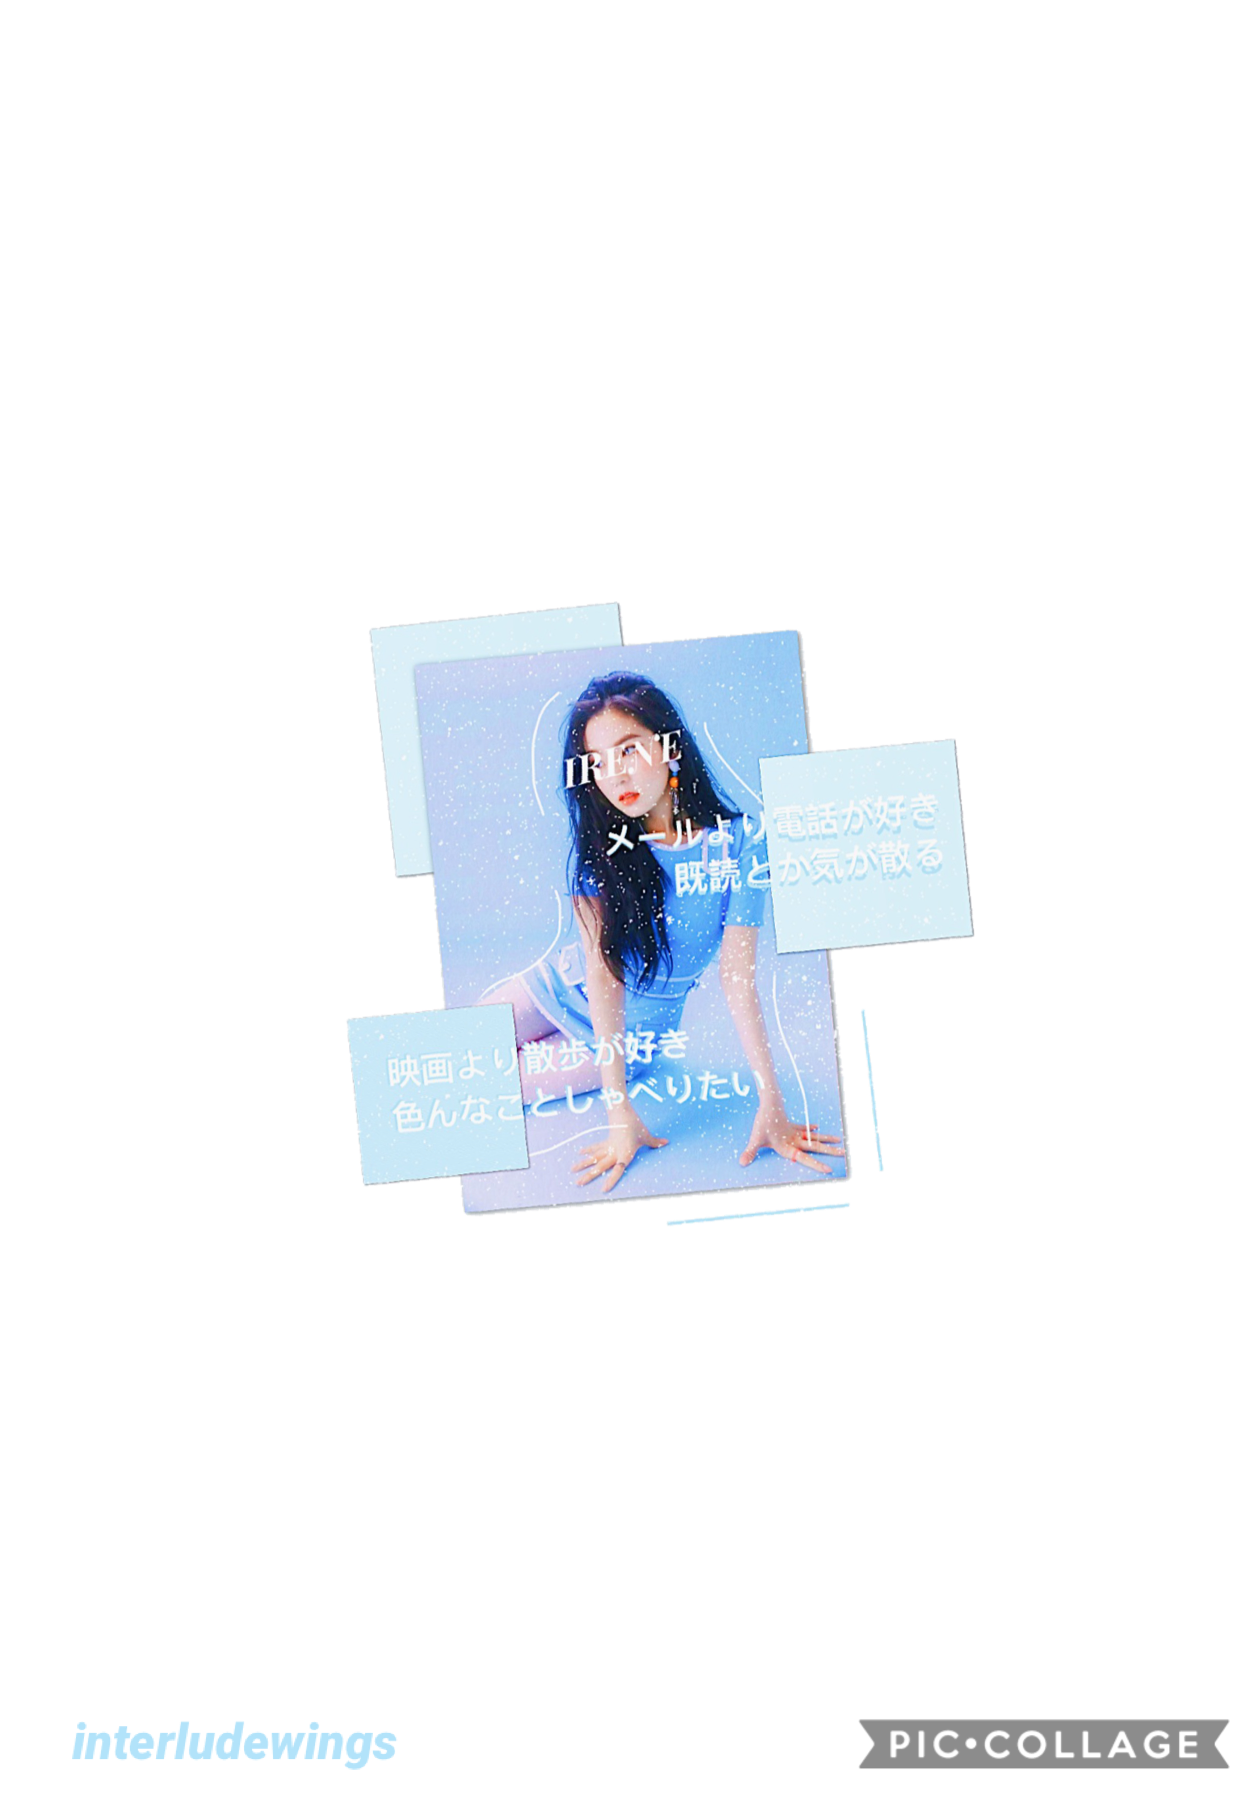 ❄️ open ❄️ 
irene~red velvet 
sorry for being inactive!! idek what this edit is 😰